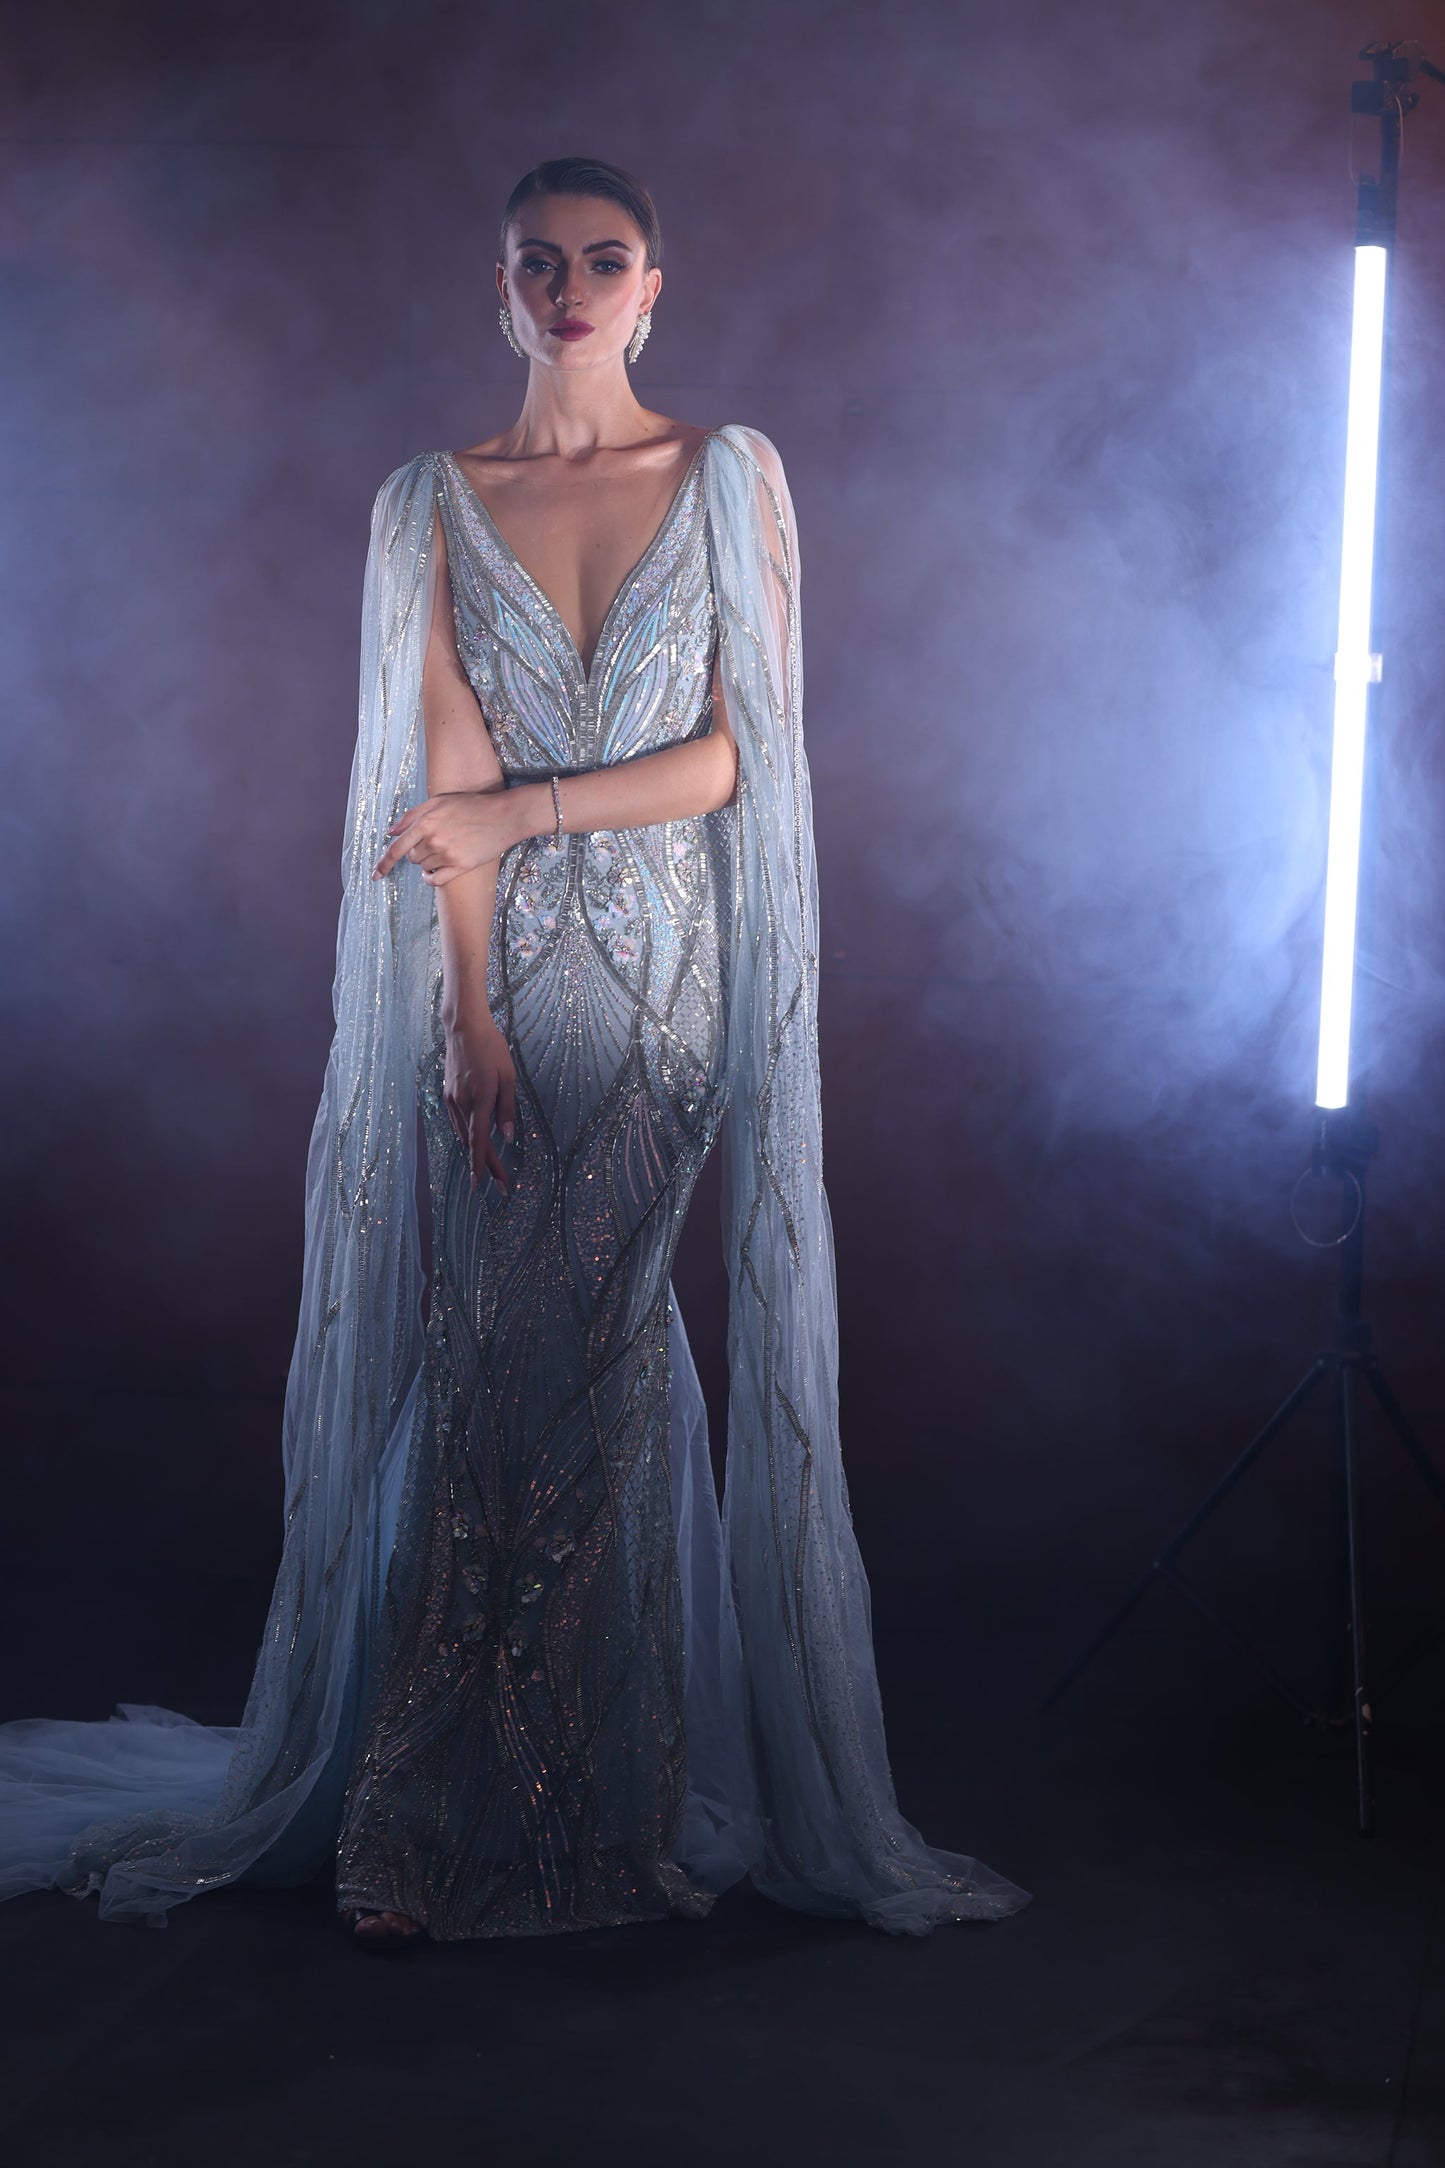 HOUSE OF MISU IN POWDER BLUE GOWN WITH WINGS